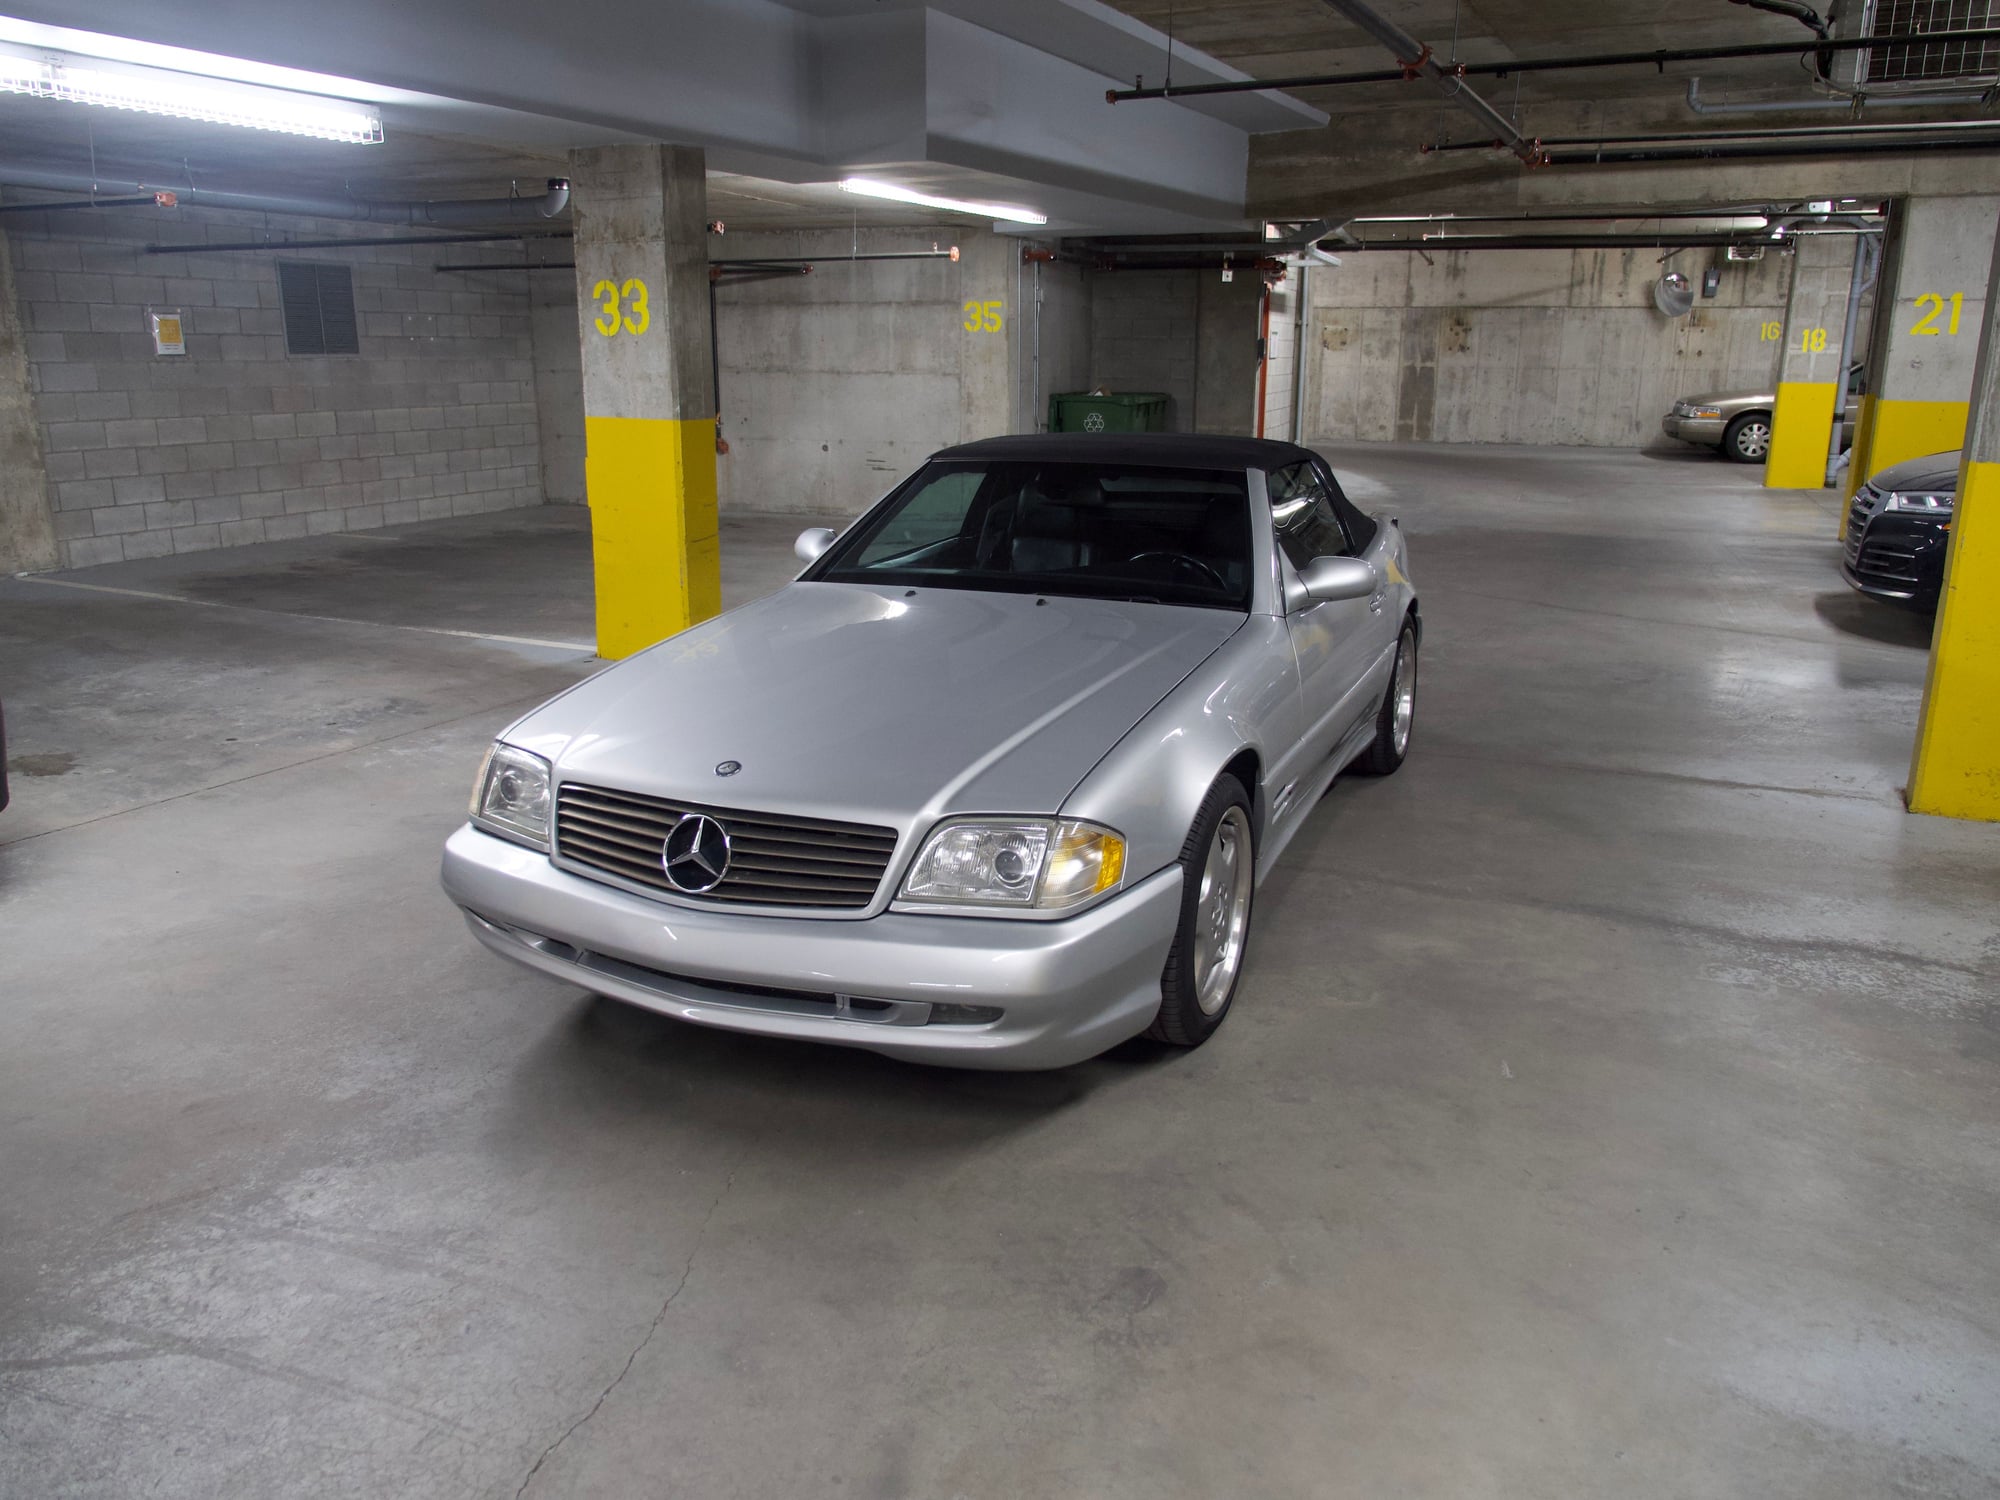 1999 Mercedes-Benz SL500 - 1999 Mercedes SL500 Sport (AMG package) with PANORAMIC SUNROOF - Used - VIN WDBFA68F4XF183900 - 148,864 Miles - 8 cyl - 2WD - Automatic - Convertible - Gray - Montréal, QC H2Y 1A, Canada